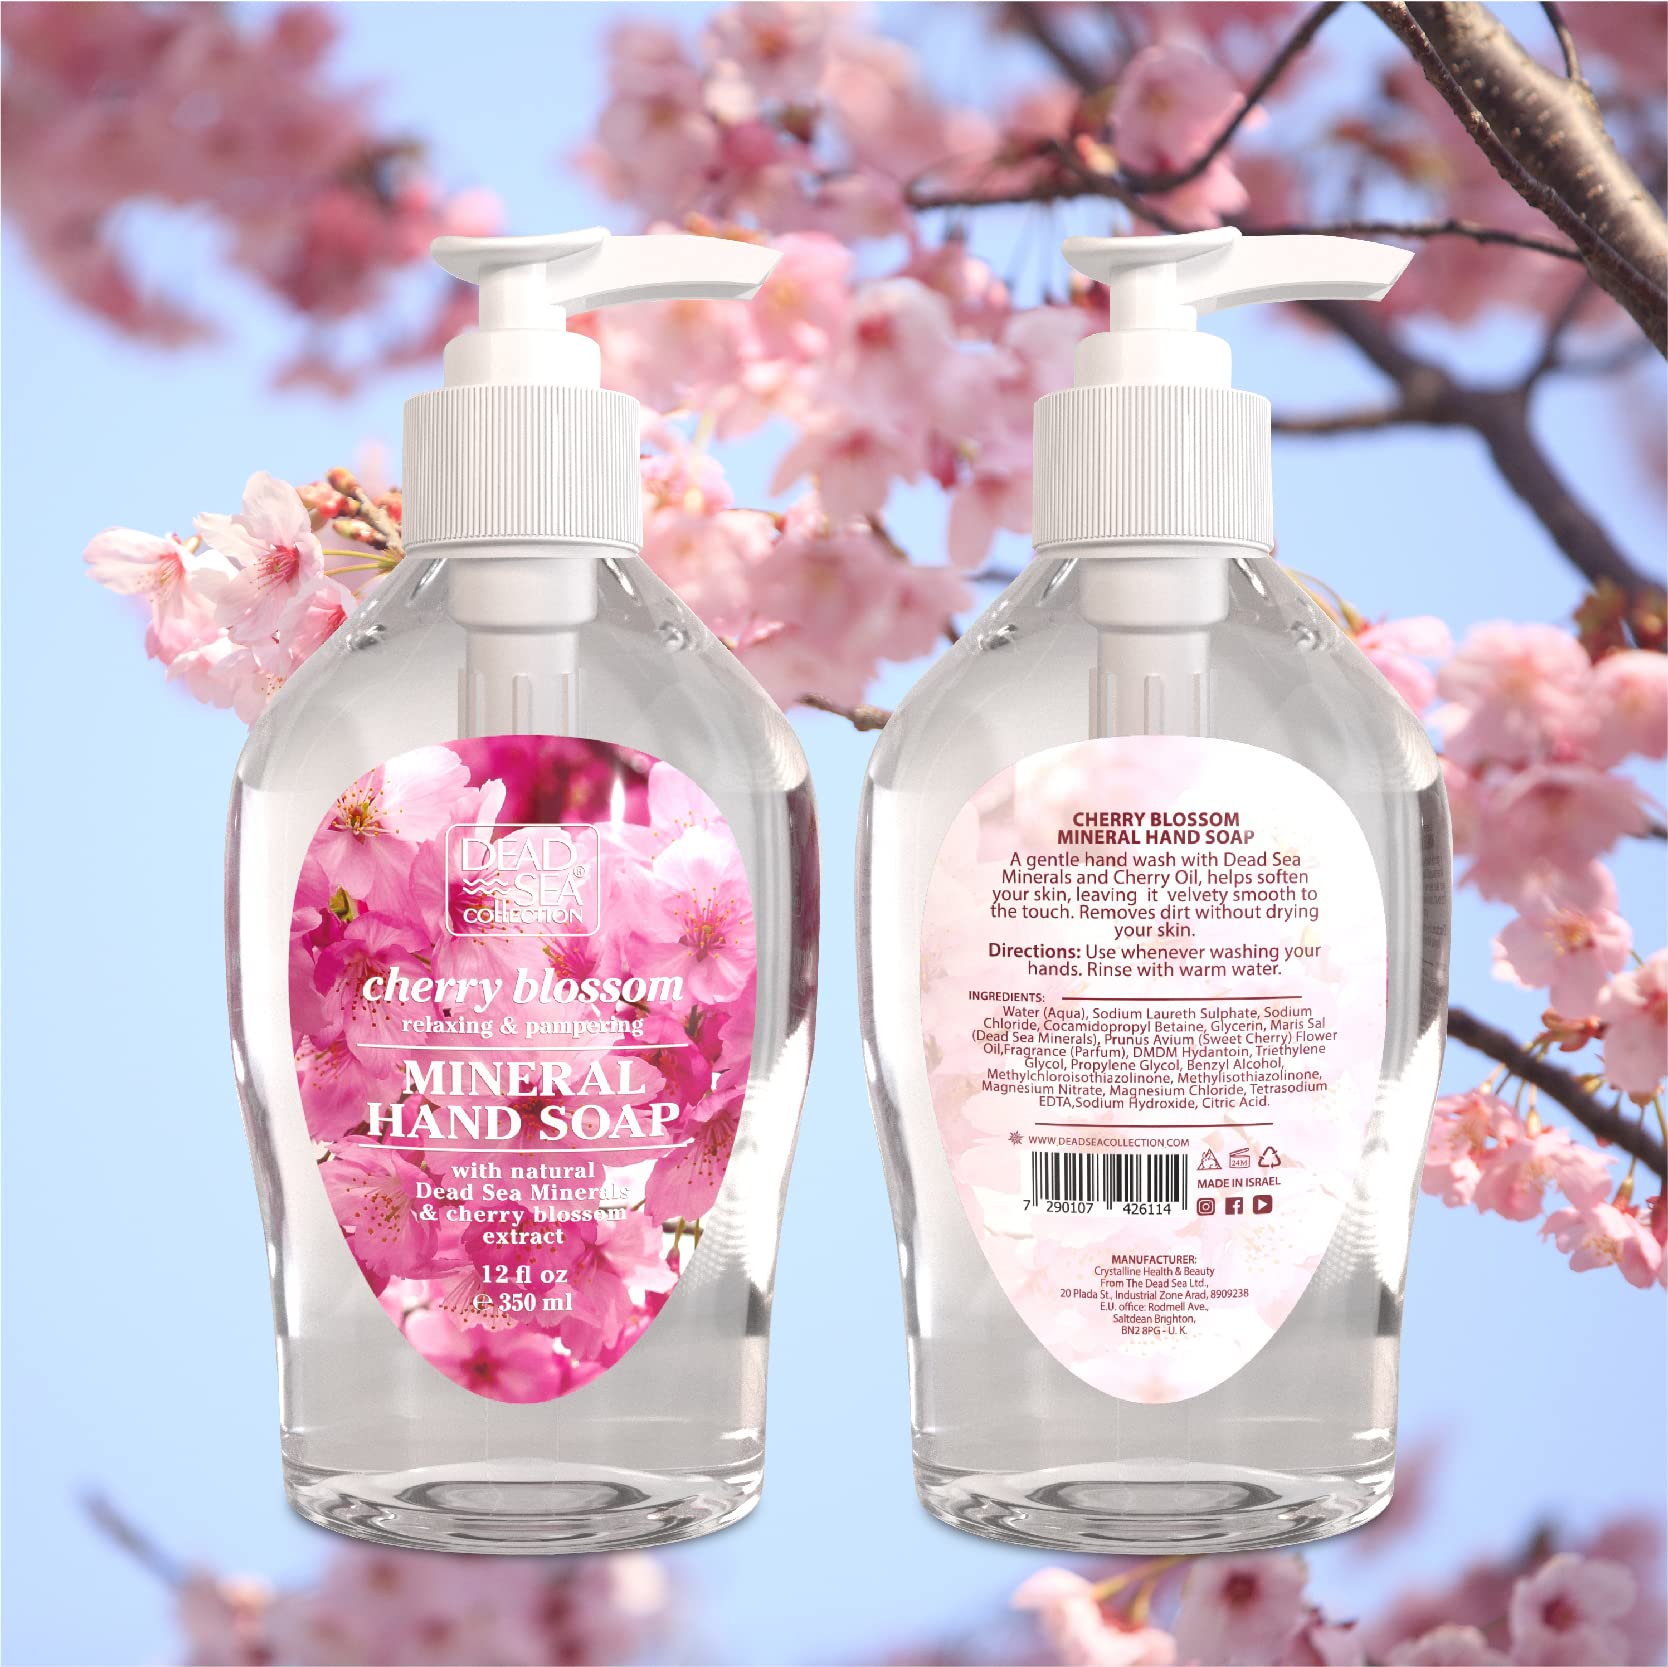 Dead Sea Collection Cherry Blossom Hand Soap – Liquid Hand Soap for All Skin Types – Pack of 3 (12 Fl. Oz. Each)